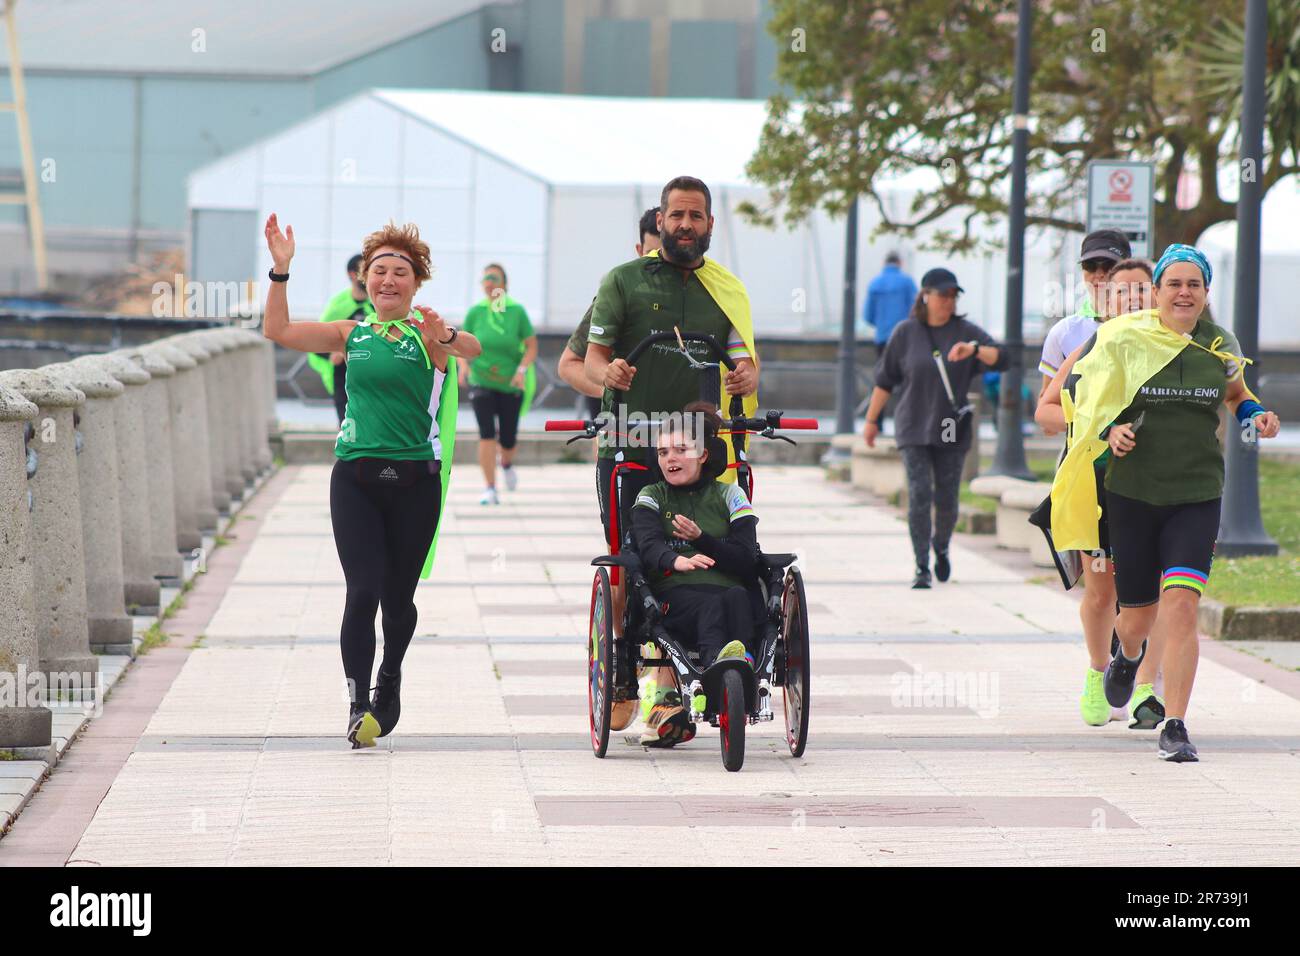 Marines ENKI Charity Run in La Coruna, Spain, highlights awareness of giving disabled children the opportunity to participate with able bodied runners. Stock Photo